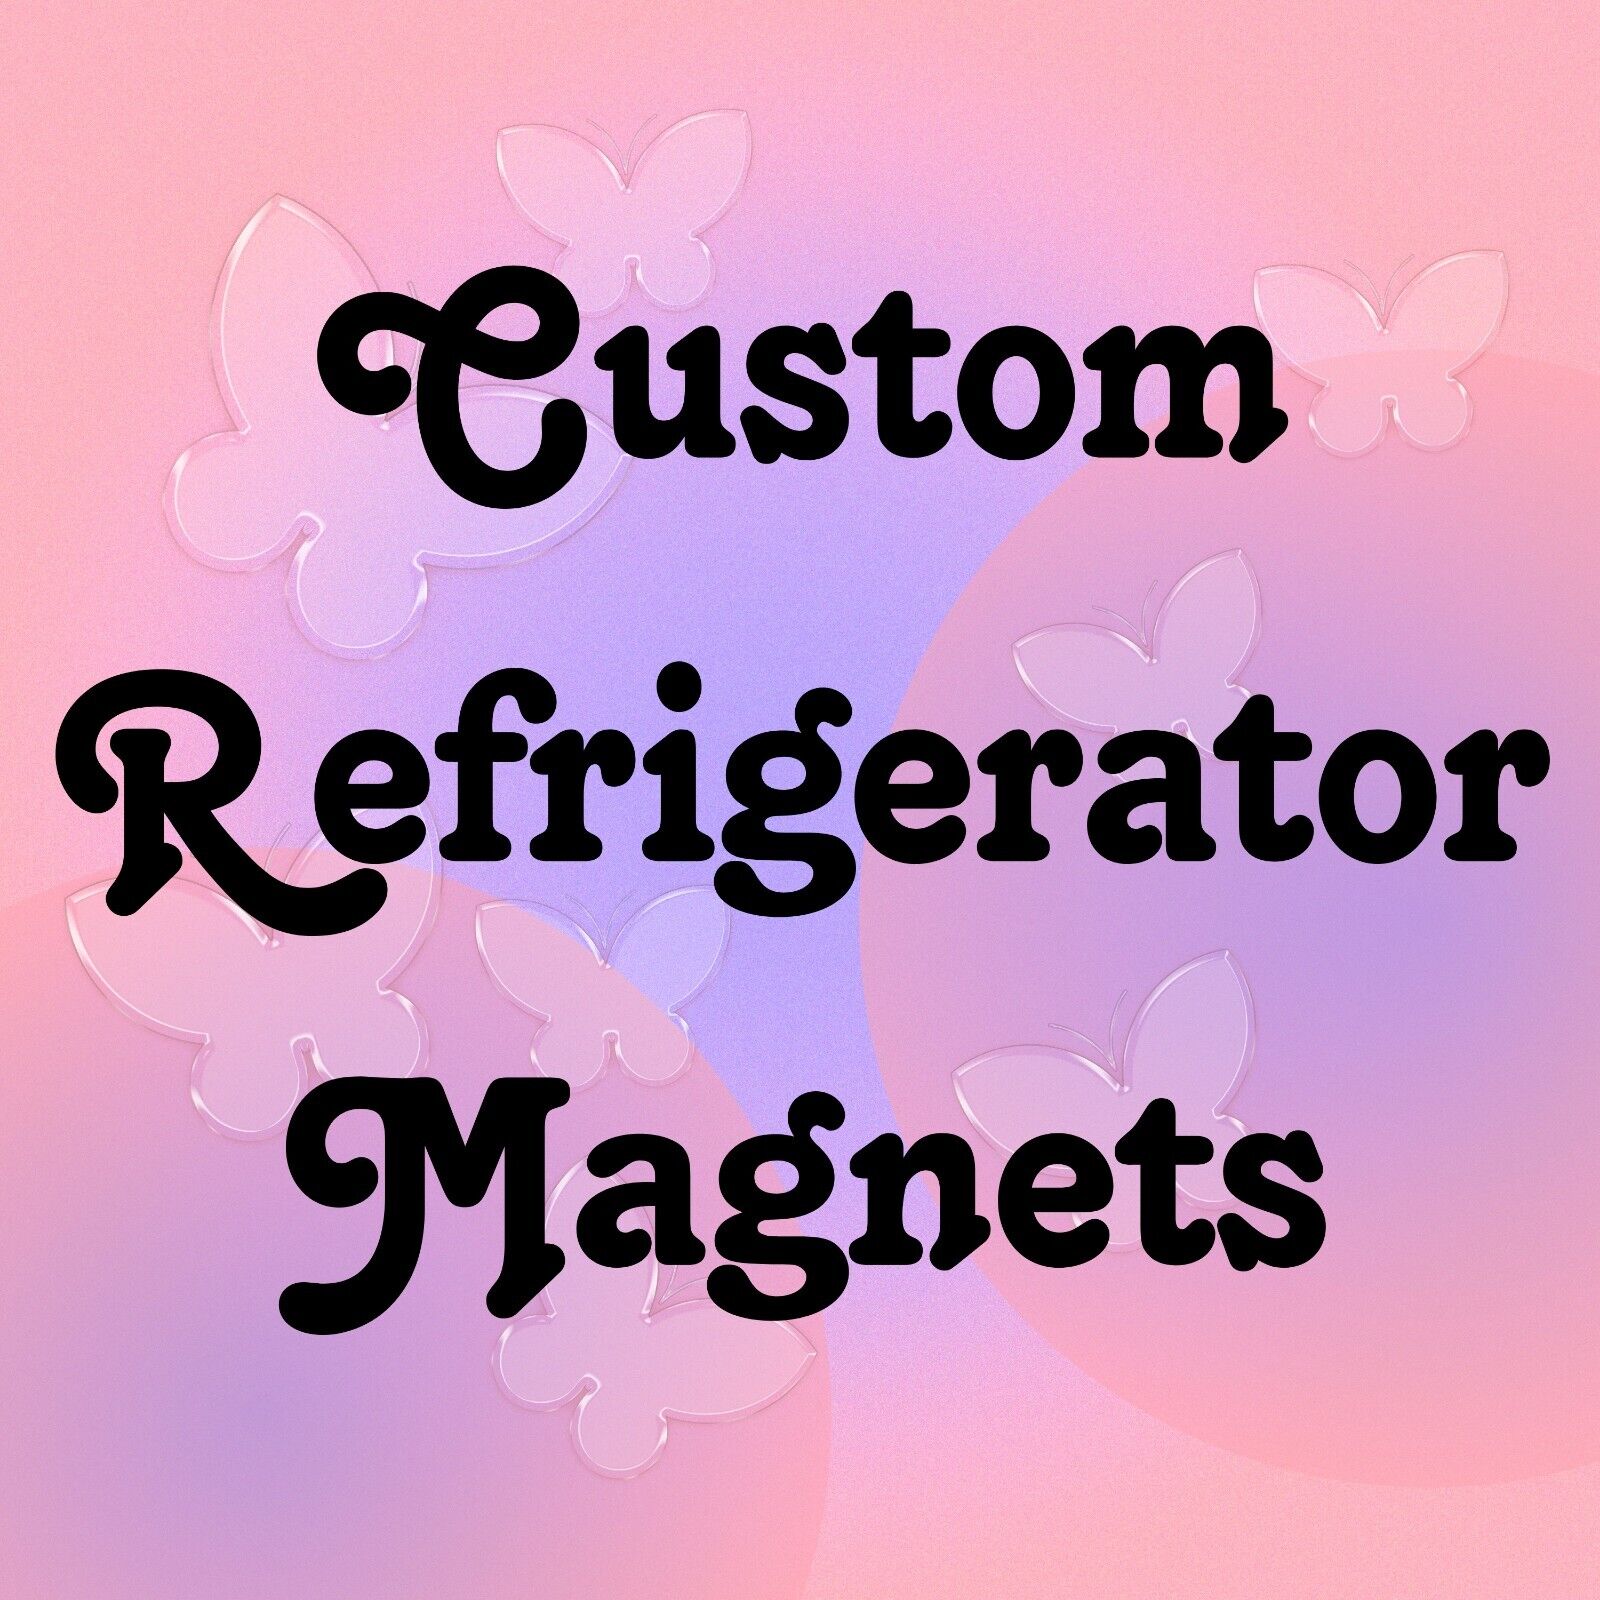 Custom 8x10 Refrigerator Magnet any image you want